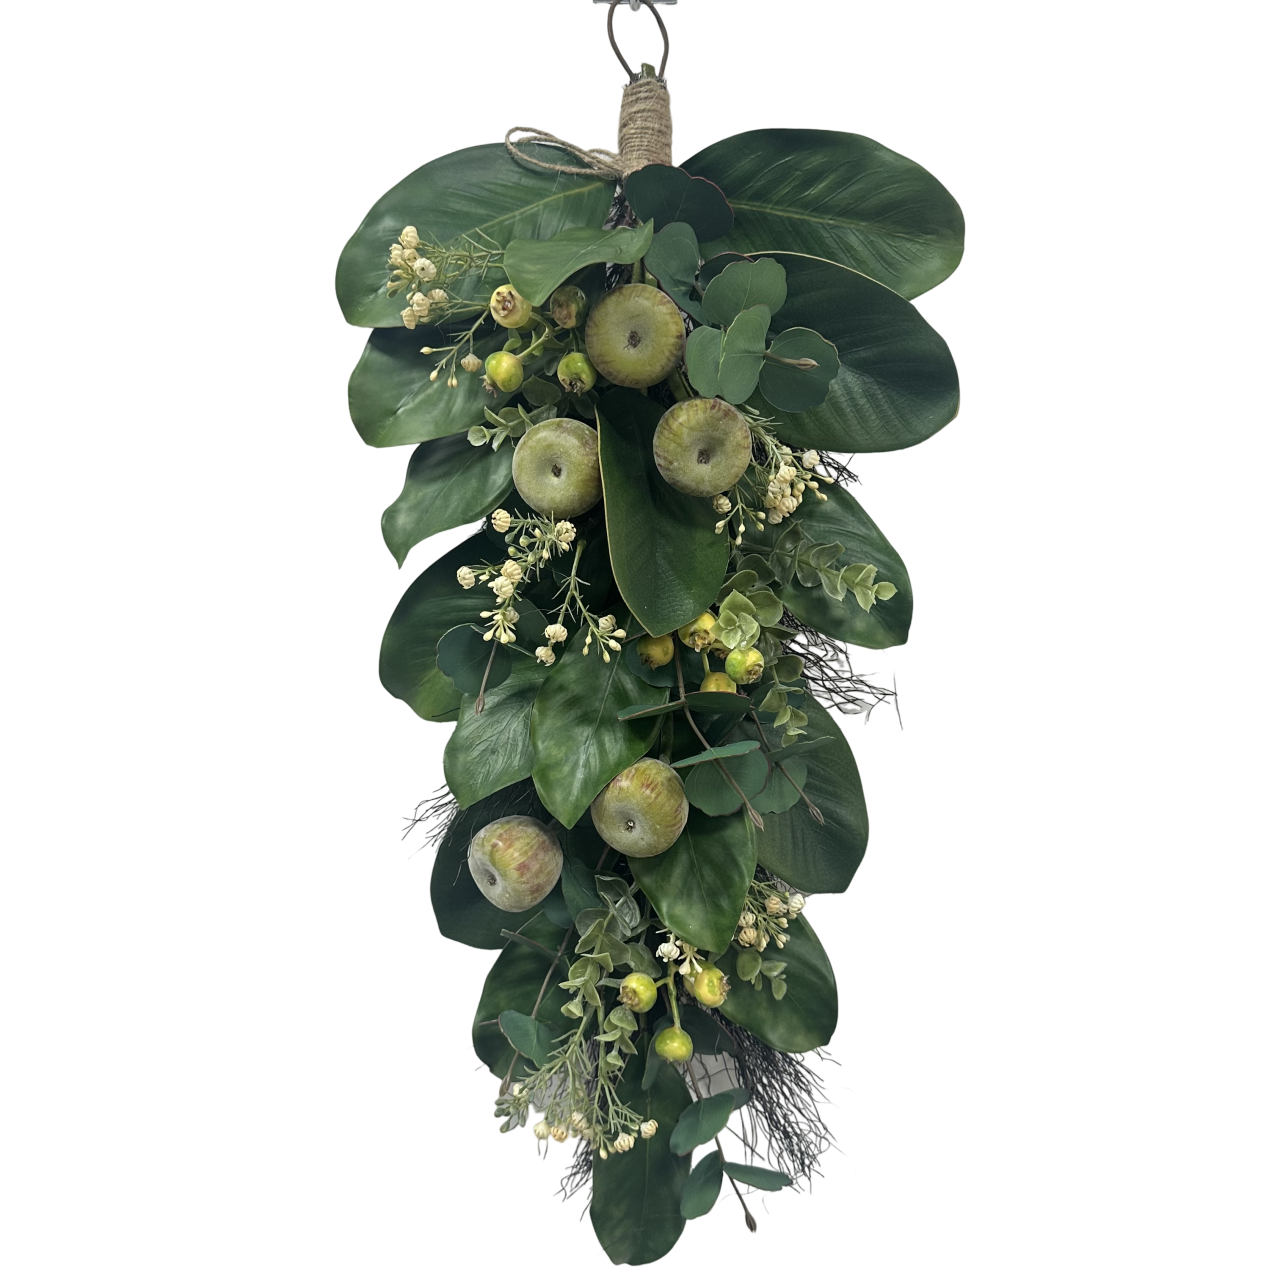 Senmasine artificial wreath mixed apple fig green leaves spring wreaths front door hanging decoration